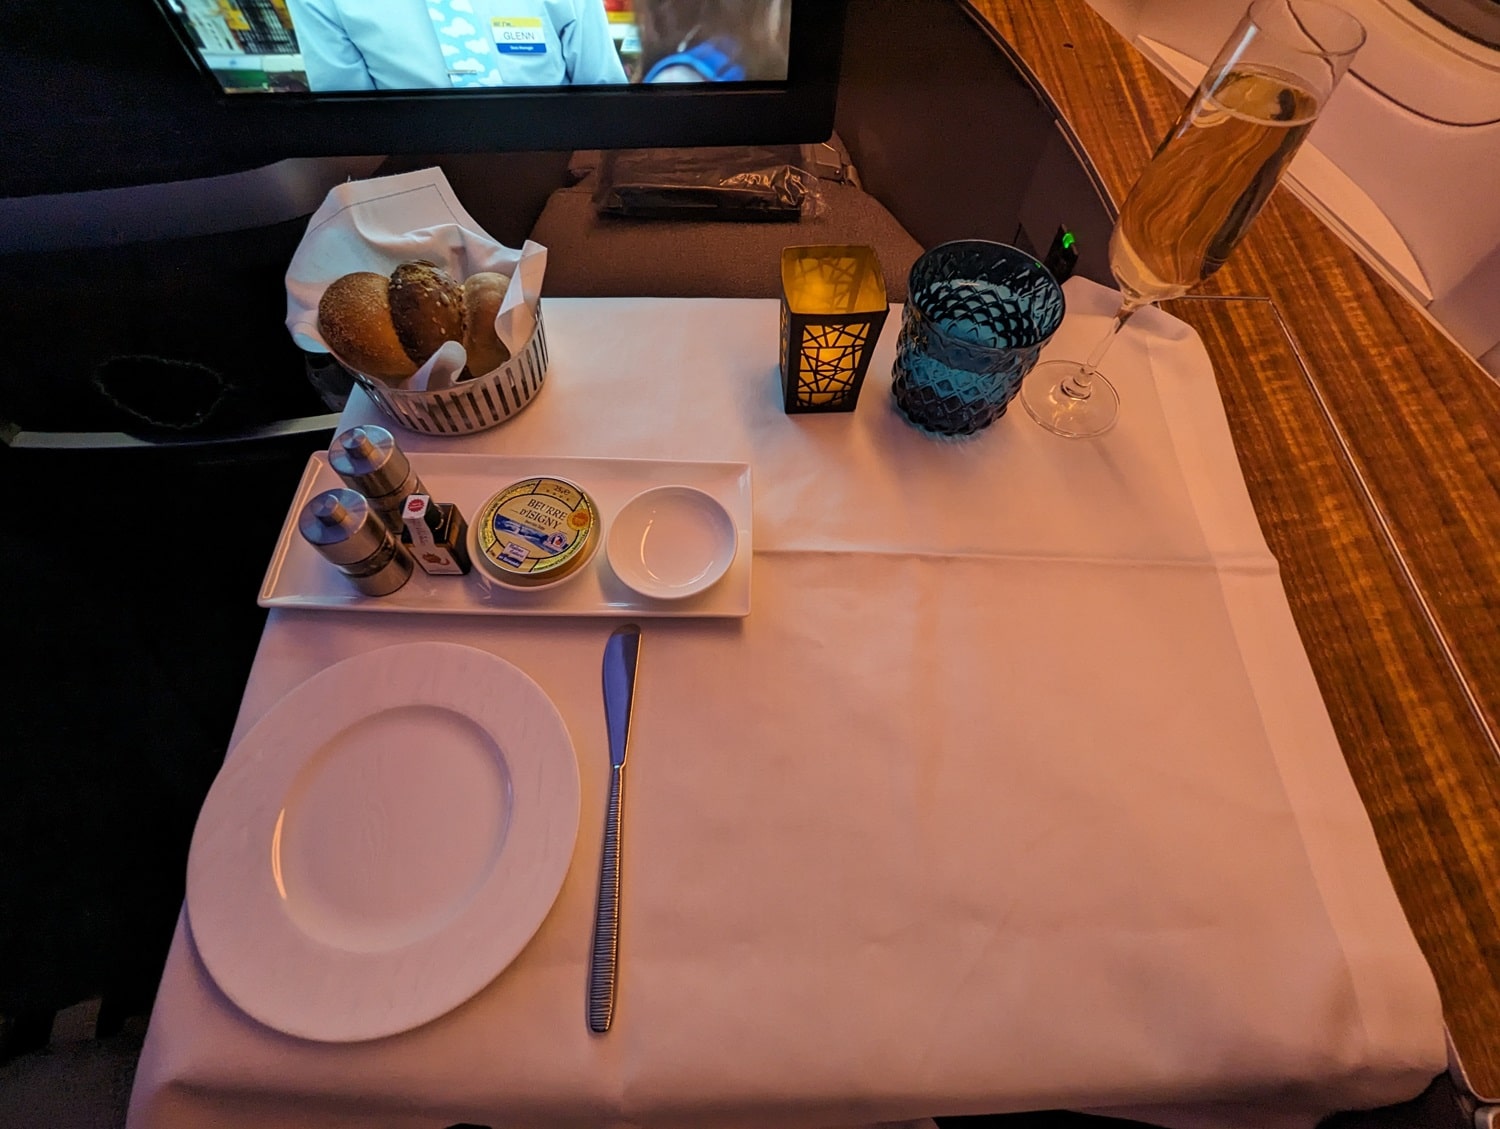 qatar airways first class 777-300er table setting with bread basket